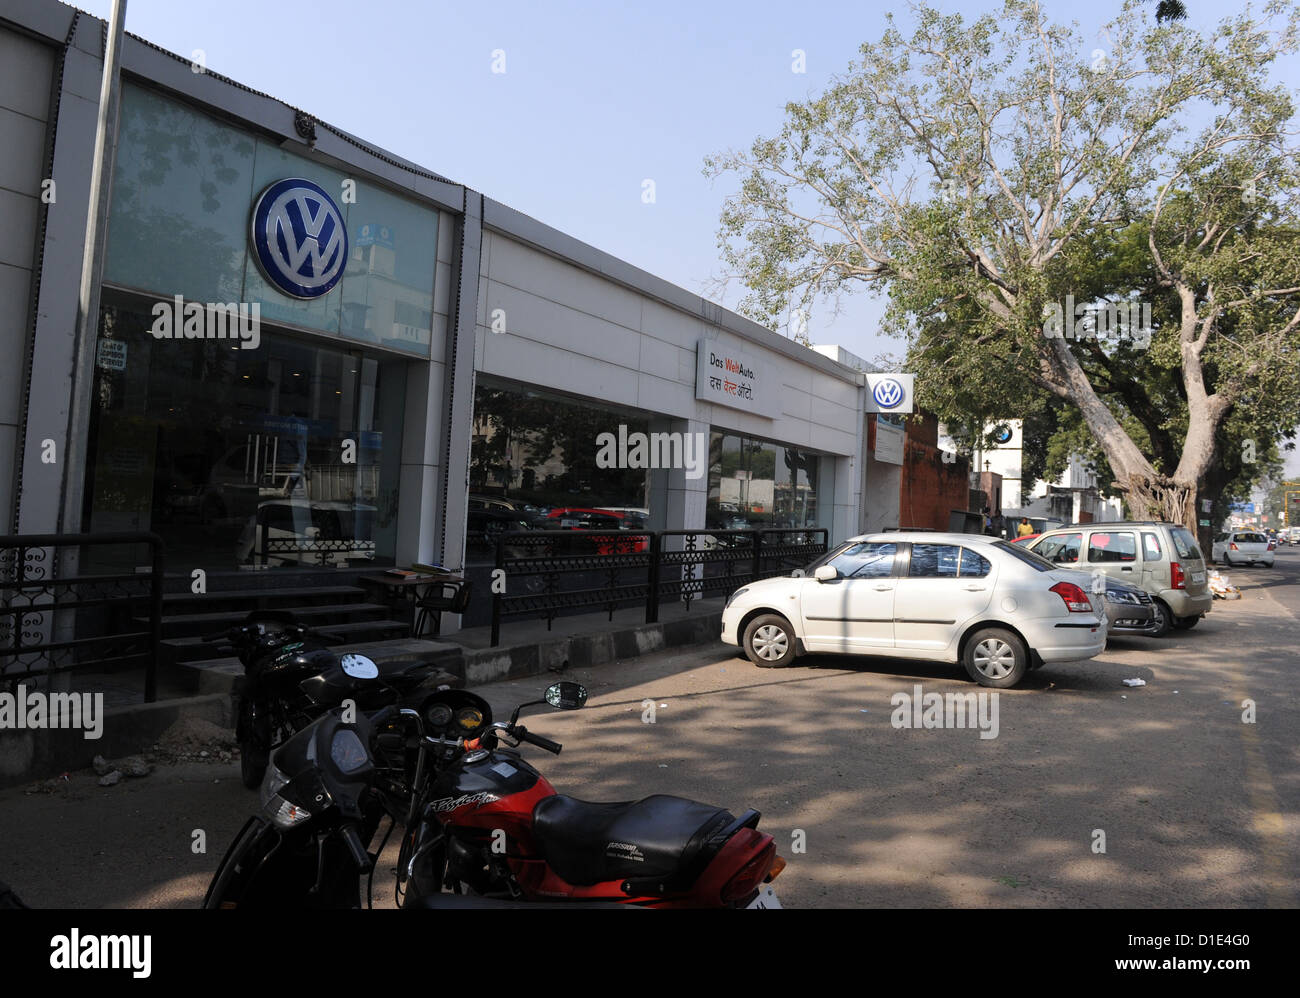 Cars and a motorbike are parked in front of a VW car dealership in Jaipur, India, 19 November 2012. On the store front of the dealership, VW advertises with the slogan 'Das Weltauto' (The world car) in German and Hindi. Photo: Jens Kalaene Stock Photo